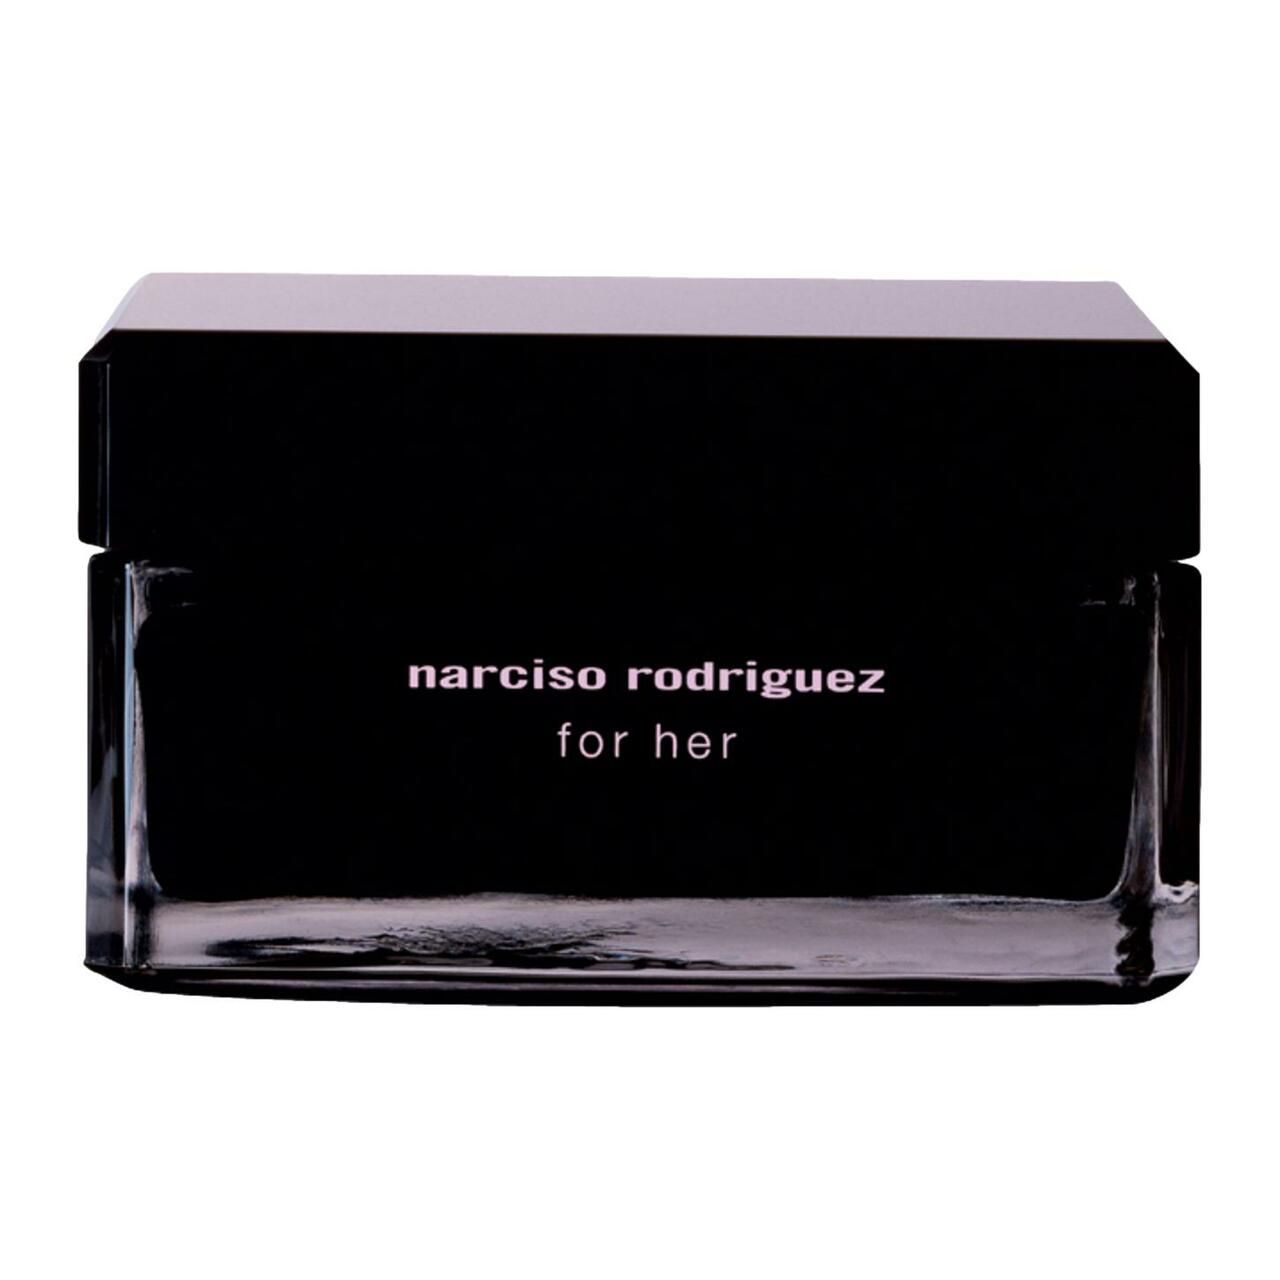 Narciso Rodriguez, For Her Body Cream